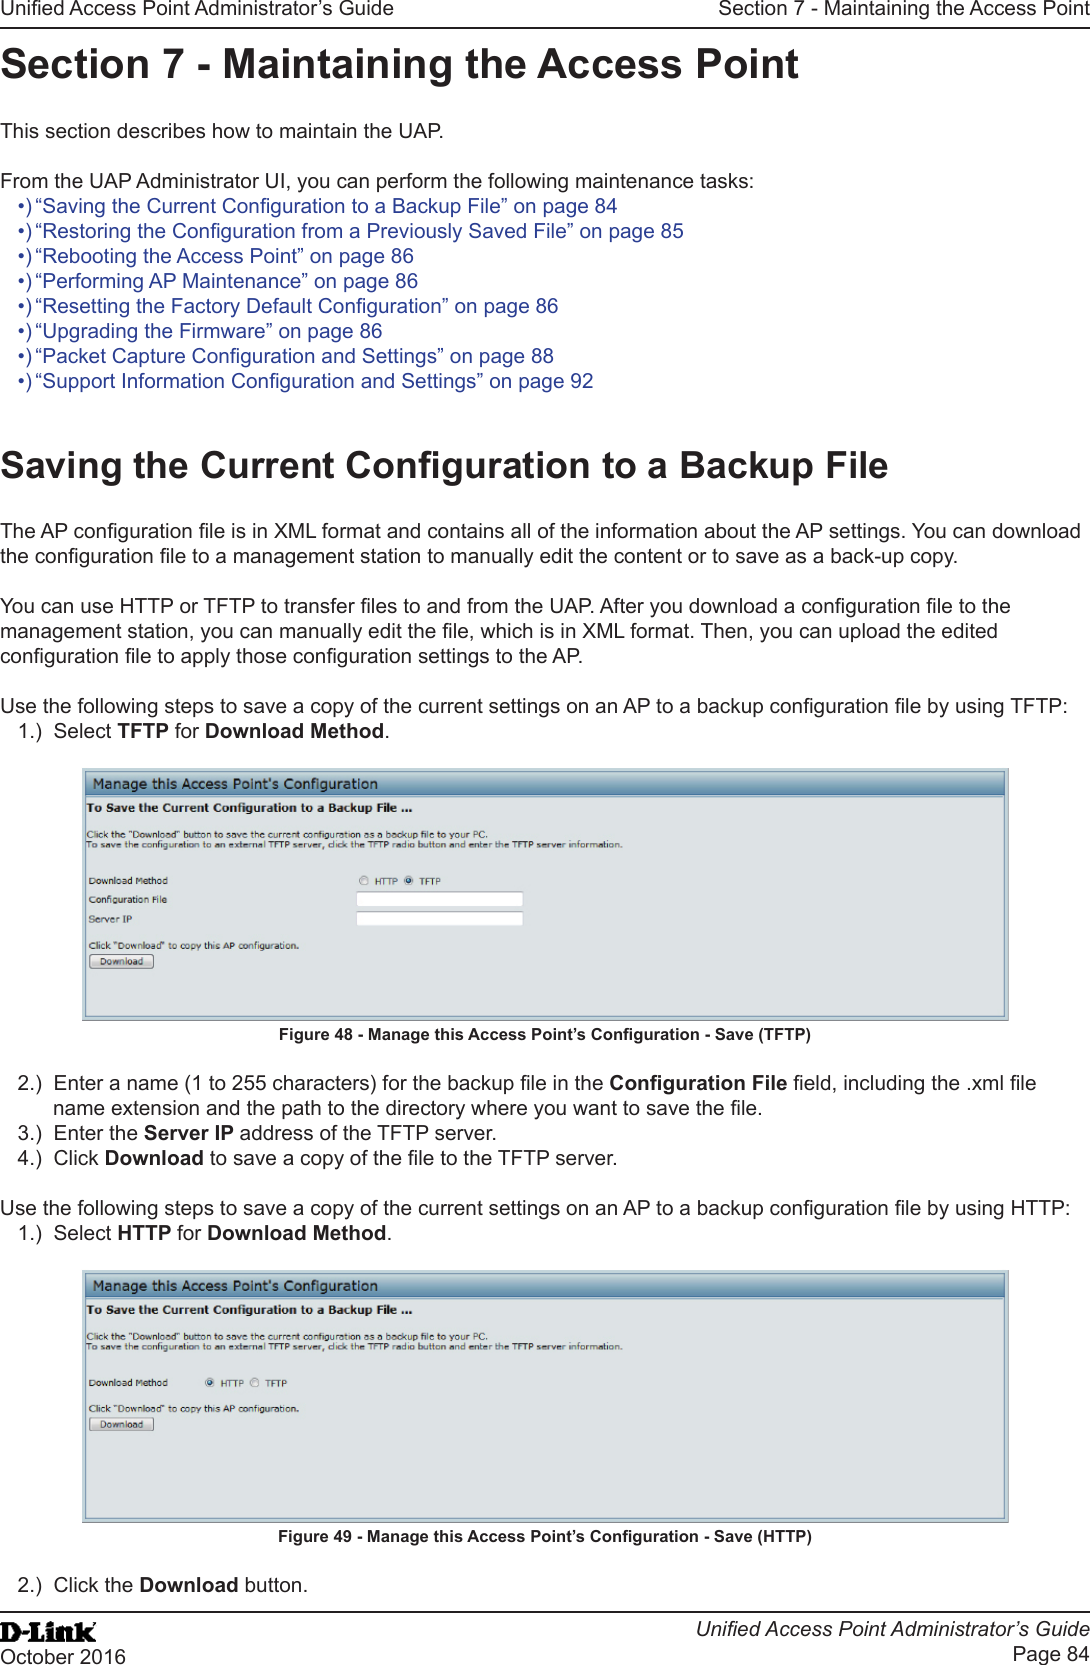 Unied Access Point Administrator’s GuideUnied Access Point Administrator’s GuidePage 84October 2016Section 7 - Maintaining the Access PointSection 7 - Maintaining the Access PointThis section describes how to maintain the UAP.From the UAP Administrator UI, you can perform the following maintenance tasks:•) “Saving the Current Conguration to a Backup File” on page 84•) “Restoring the Conguration from a Previously Saved File” on page 85•) “Rebooting the Access Point” on page 86•) “Performing AP Maintenance” on page 86•) “Resetting the Factory Default Conguration” on page 86•) “Upgrading the Firmware” on page 86•) “Packet Capture Conguration and Settings” on page 88•) “Support Information Conguration and Settings” on page 92Saving the Current Conguration to a Backup FileThe AP conguration le is in XML format and contains all of the information about the AP settings. You can download the conguration le to a management station to manually edit the content or to save as a back-up copy. You can use HTTP or TFTP to transfer les to and from the UAP. After you download a conguration le to the management station, you can manually edit the le, which is in XML format. Then, you can upload the edited conguration le to apply those conguration settings to the AP.Use the following steps to save a copy of the current settings on an AP to a backup conguration le by using TFTP:1.)  Select TFTP for Download Method.Figure 48 - Manage this Access Point’s Conguration - Save (TFTP)2.)  Enter a name (1 to 255 characters) for the backup le in the Conguration File eld, including the .xml le name extension and the path to the directory where you want to save the le.3.)  Enter the Server IP address of the TFTP server.4.)  Click Download to save a copy of the le to the TFTP server.Use the following steps to save a copy of the current settings on an AP to a backup conguration le by using HTTP:1.)  Select HTTP for Download Method.Figure 49 - Manage this Access Point’s Conguration - Save (HTTP)2.)  Click the Download button.